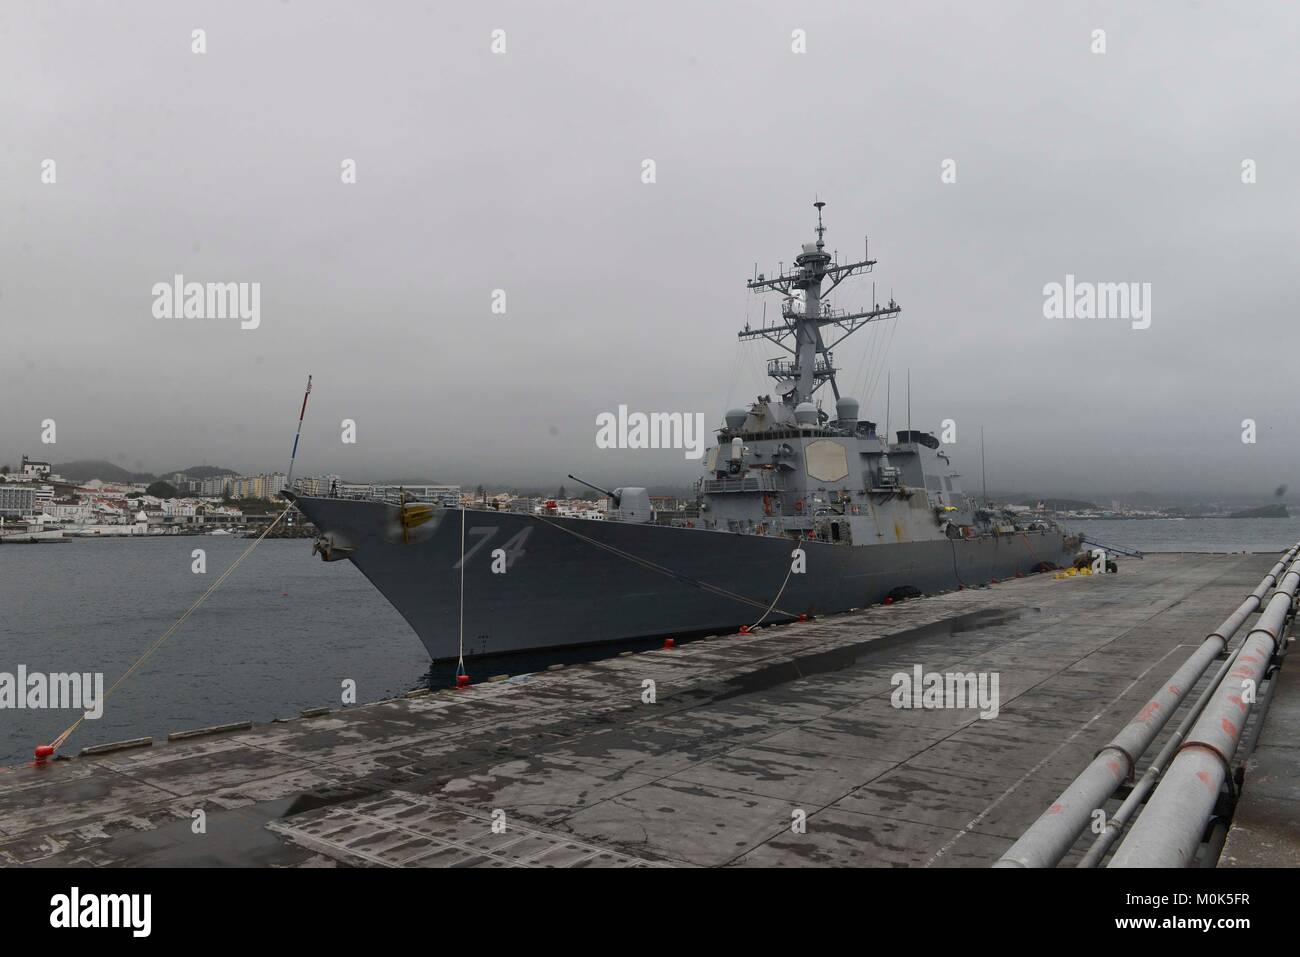 The U.S. Navy Arleigh Burke guided-missile destroyer USS McFaul moors in port April 29, 2015 in Ponta Delgada, Portugal. Stock Photo